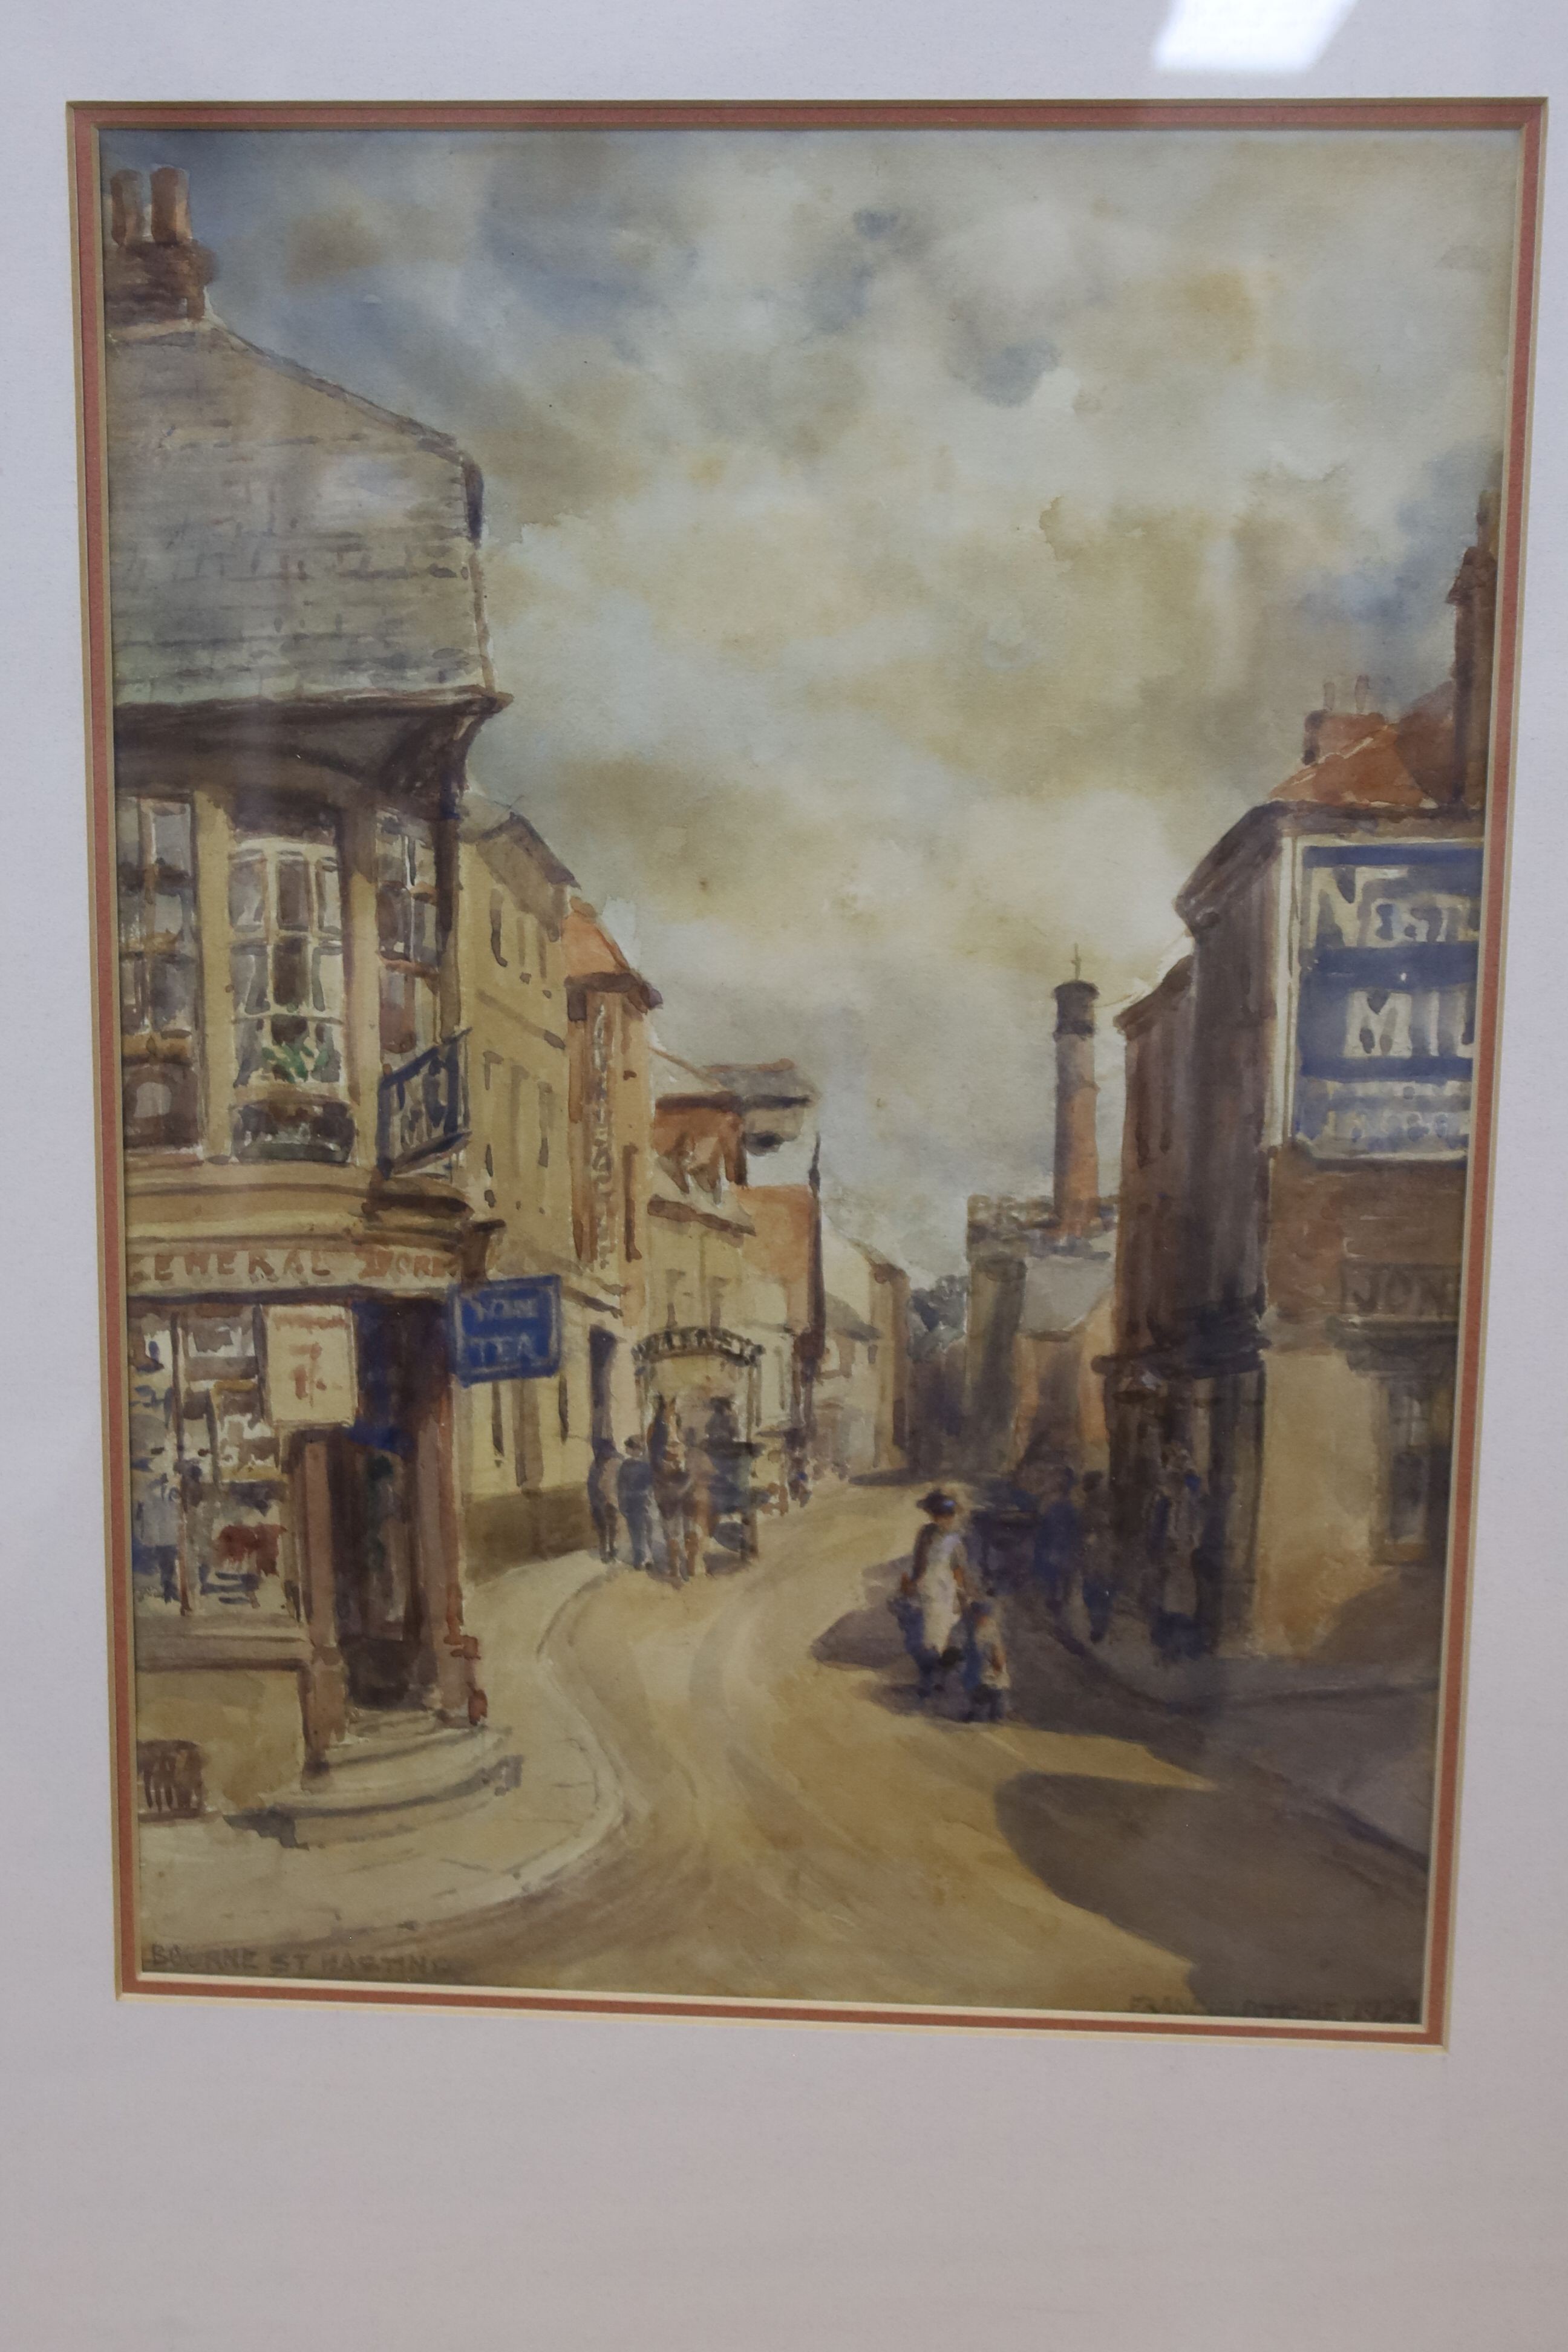 Ebenezer Wake Cook (1843-1926), watercolour, 'Vietre with the the Bay of Salerno', signed, 35 x 18cm, Francis Browne (Exh.1885-1926), watercolour, 'Bourne Street, Hastings', 34 x 24cm